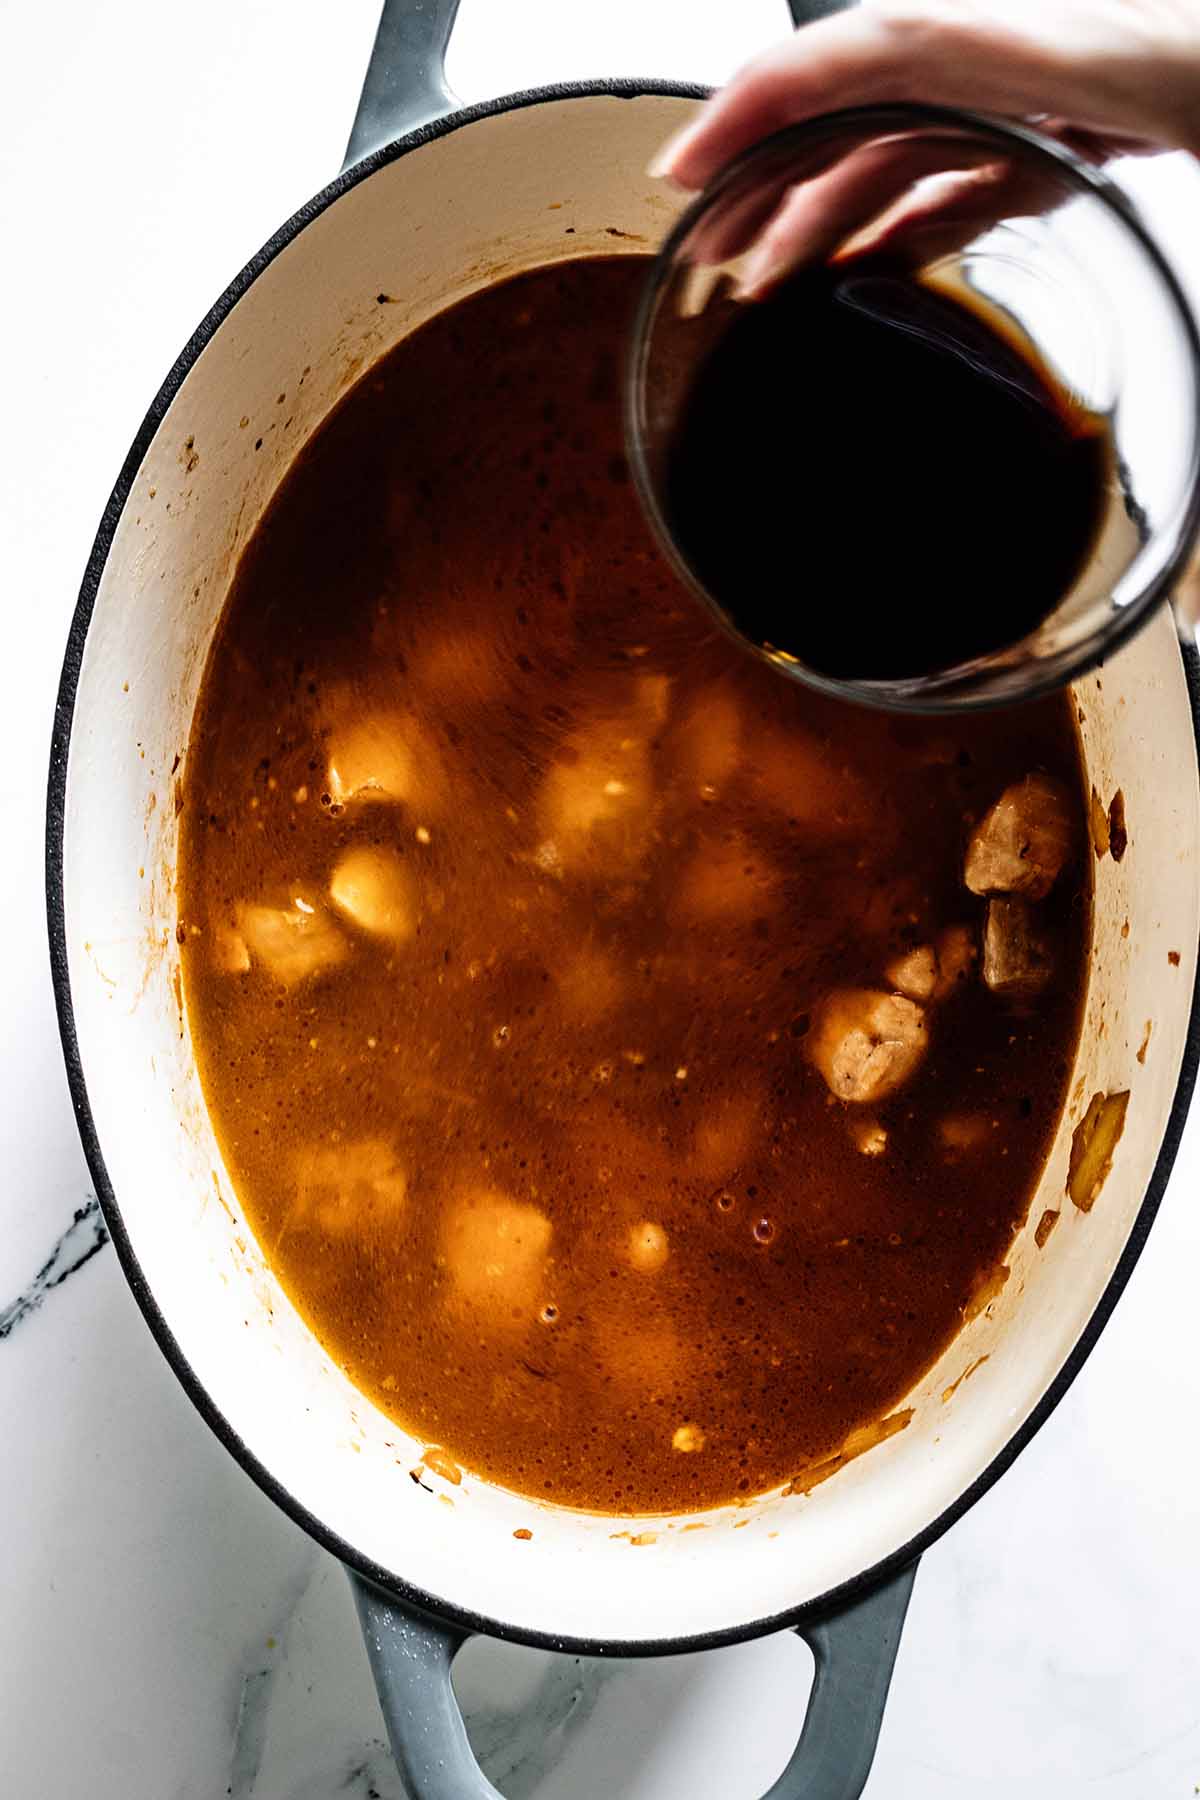 Overhead view of soy sauce being added to pot of soup